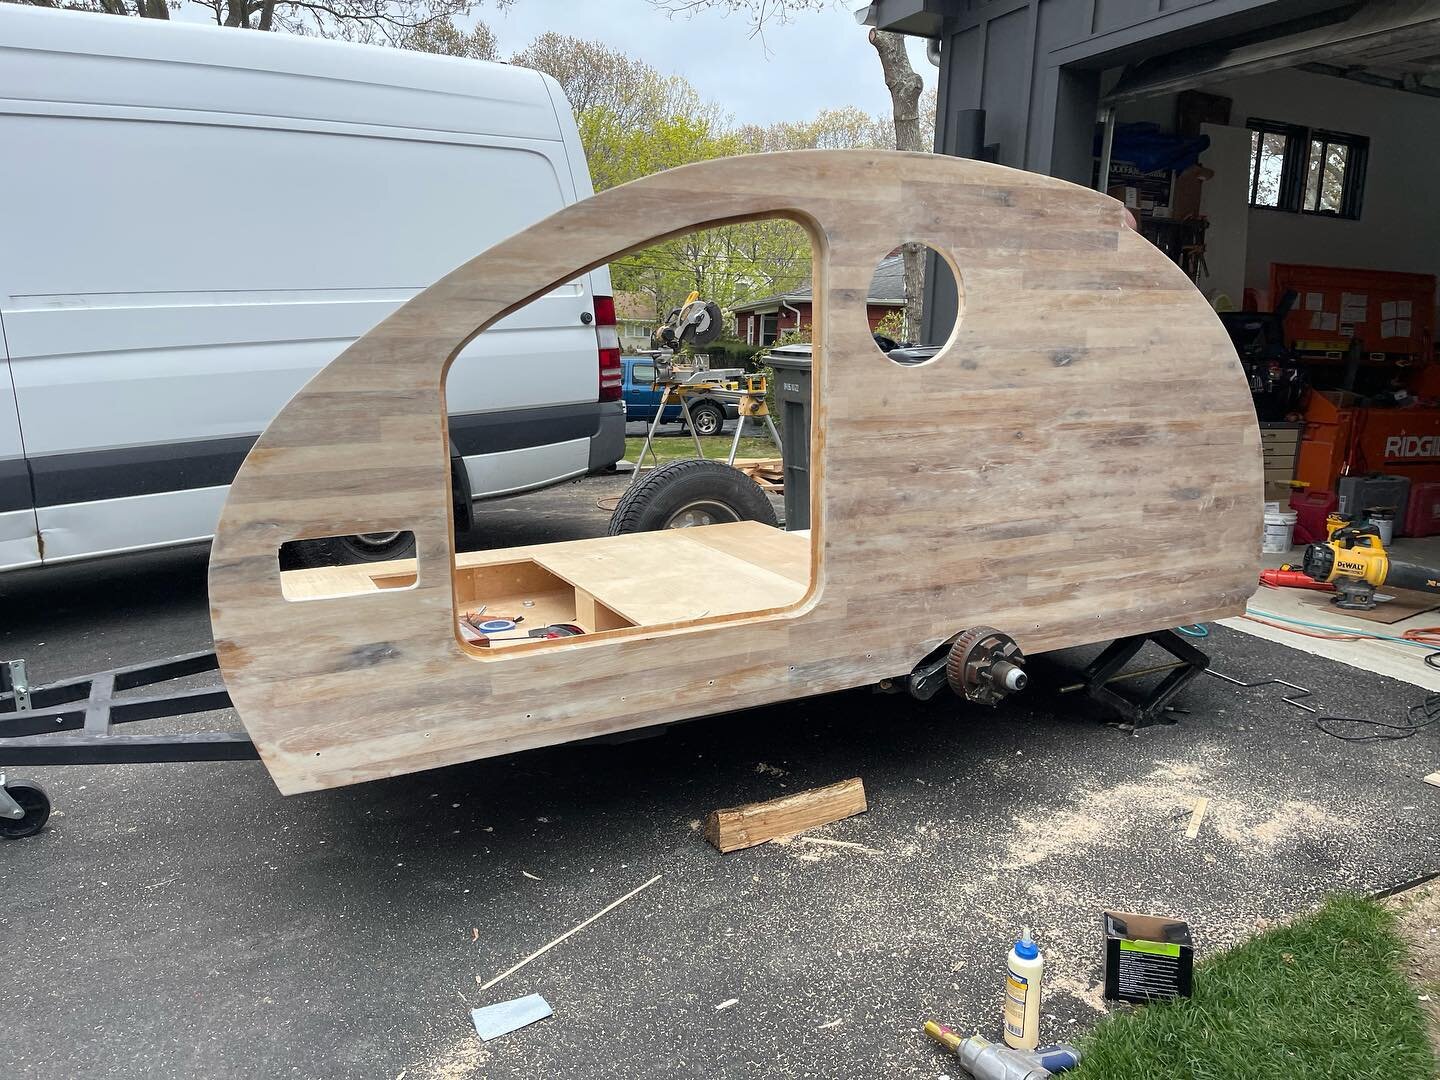 After a lot of problem solving, the drivers side wall is on! Second is getting fiberglass and epoxy now. 

&hellip;

#teardropthalassa #teardrop #teardroptrailer #teardropcamper #teardroptrailers #teardropcampers #teardropfans #teardroplife #teardrop